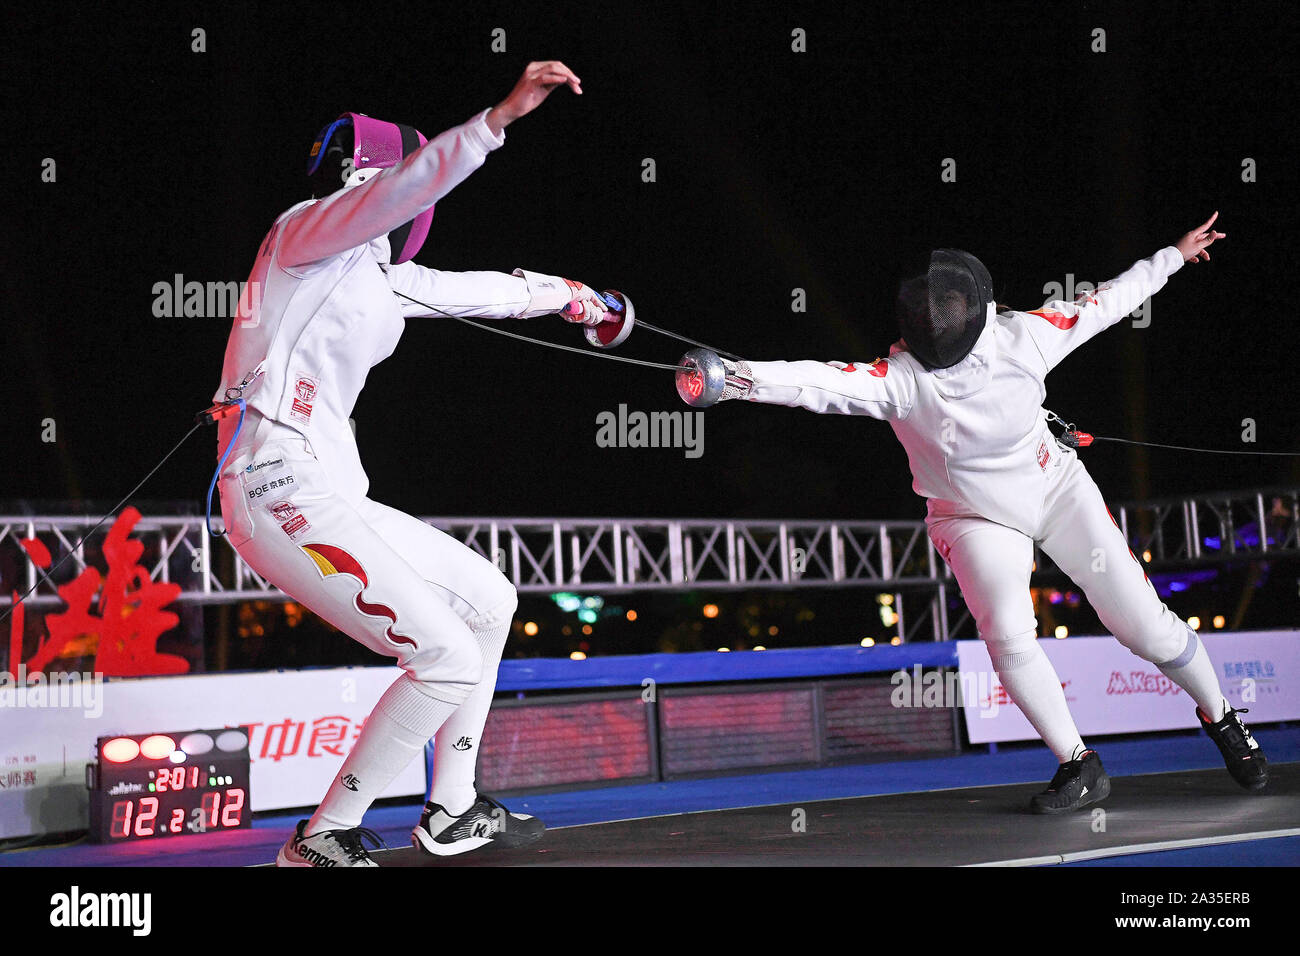 Nanchang, China's Jiangxi Province. 5th Oct, 2019. Sun Yiwen (L) of China competes with her teammate Xu Anqi during the women's epee final at the 2019 China Fencing Masters in Nanchang, east China's Jiangxi Province, Oct. 5, 2019. Credit: Wan Xiang/Xinhua/Alamy Live News Stock Photo